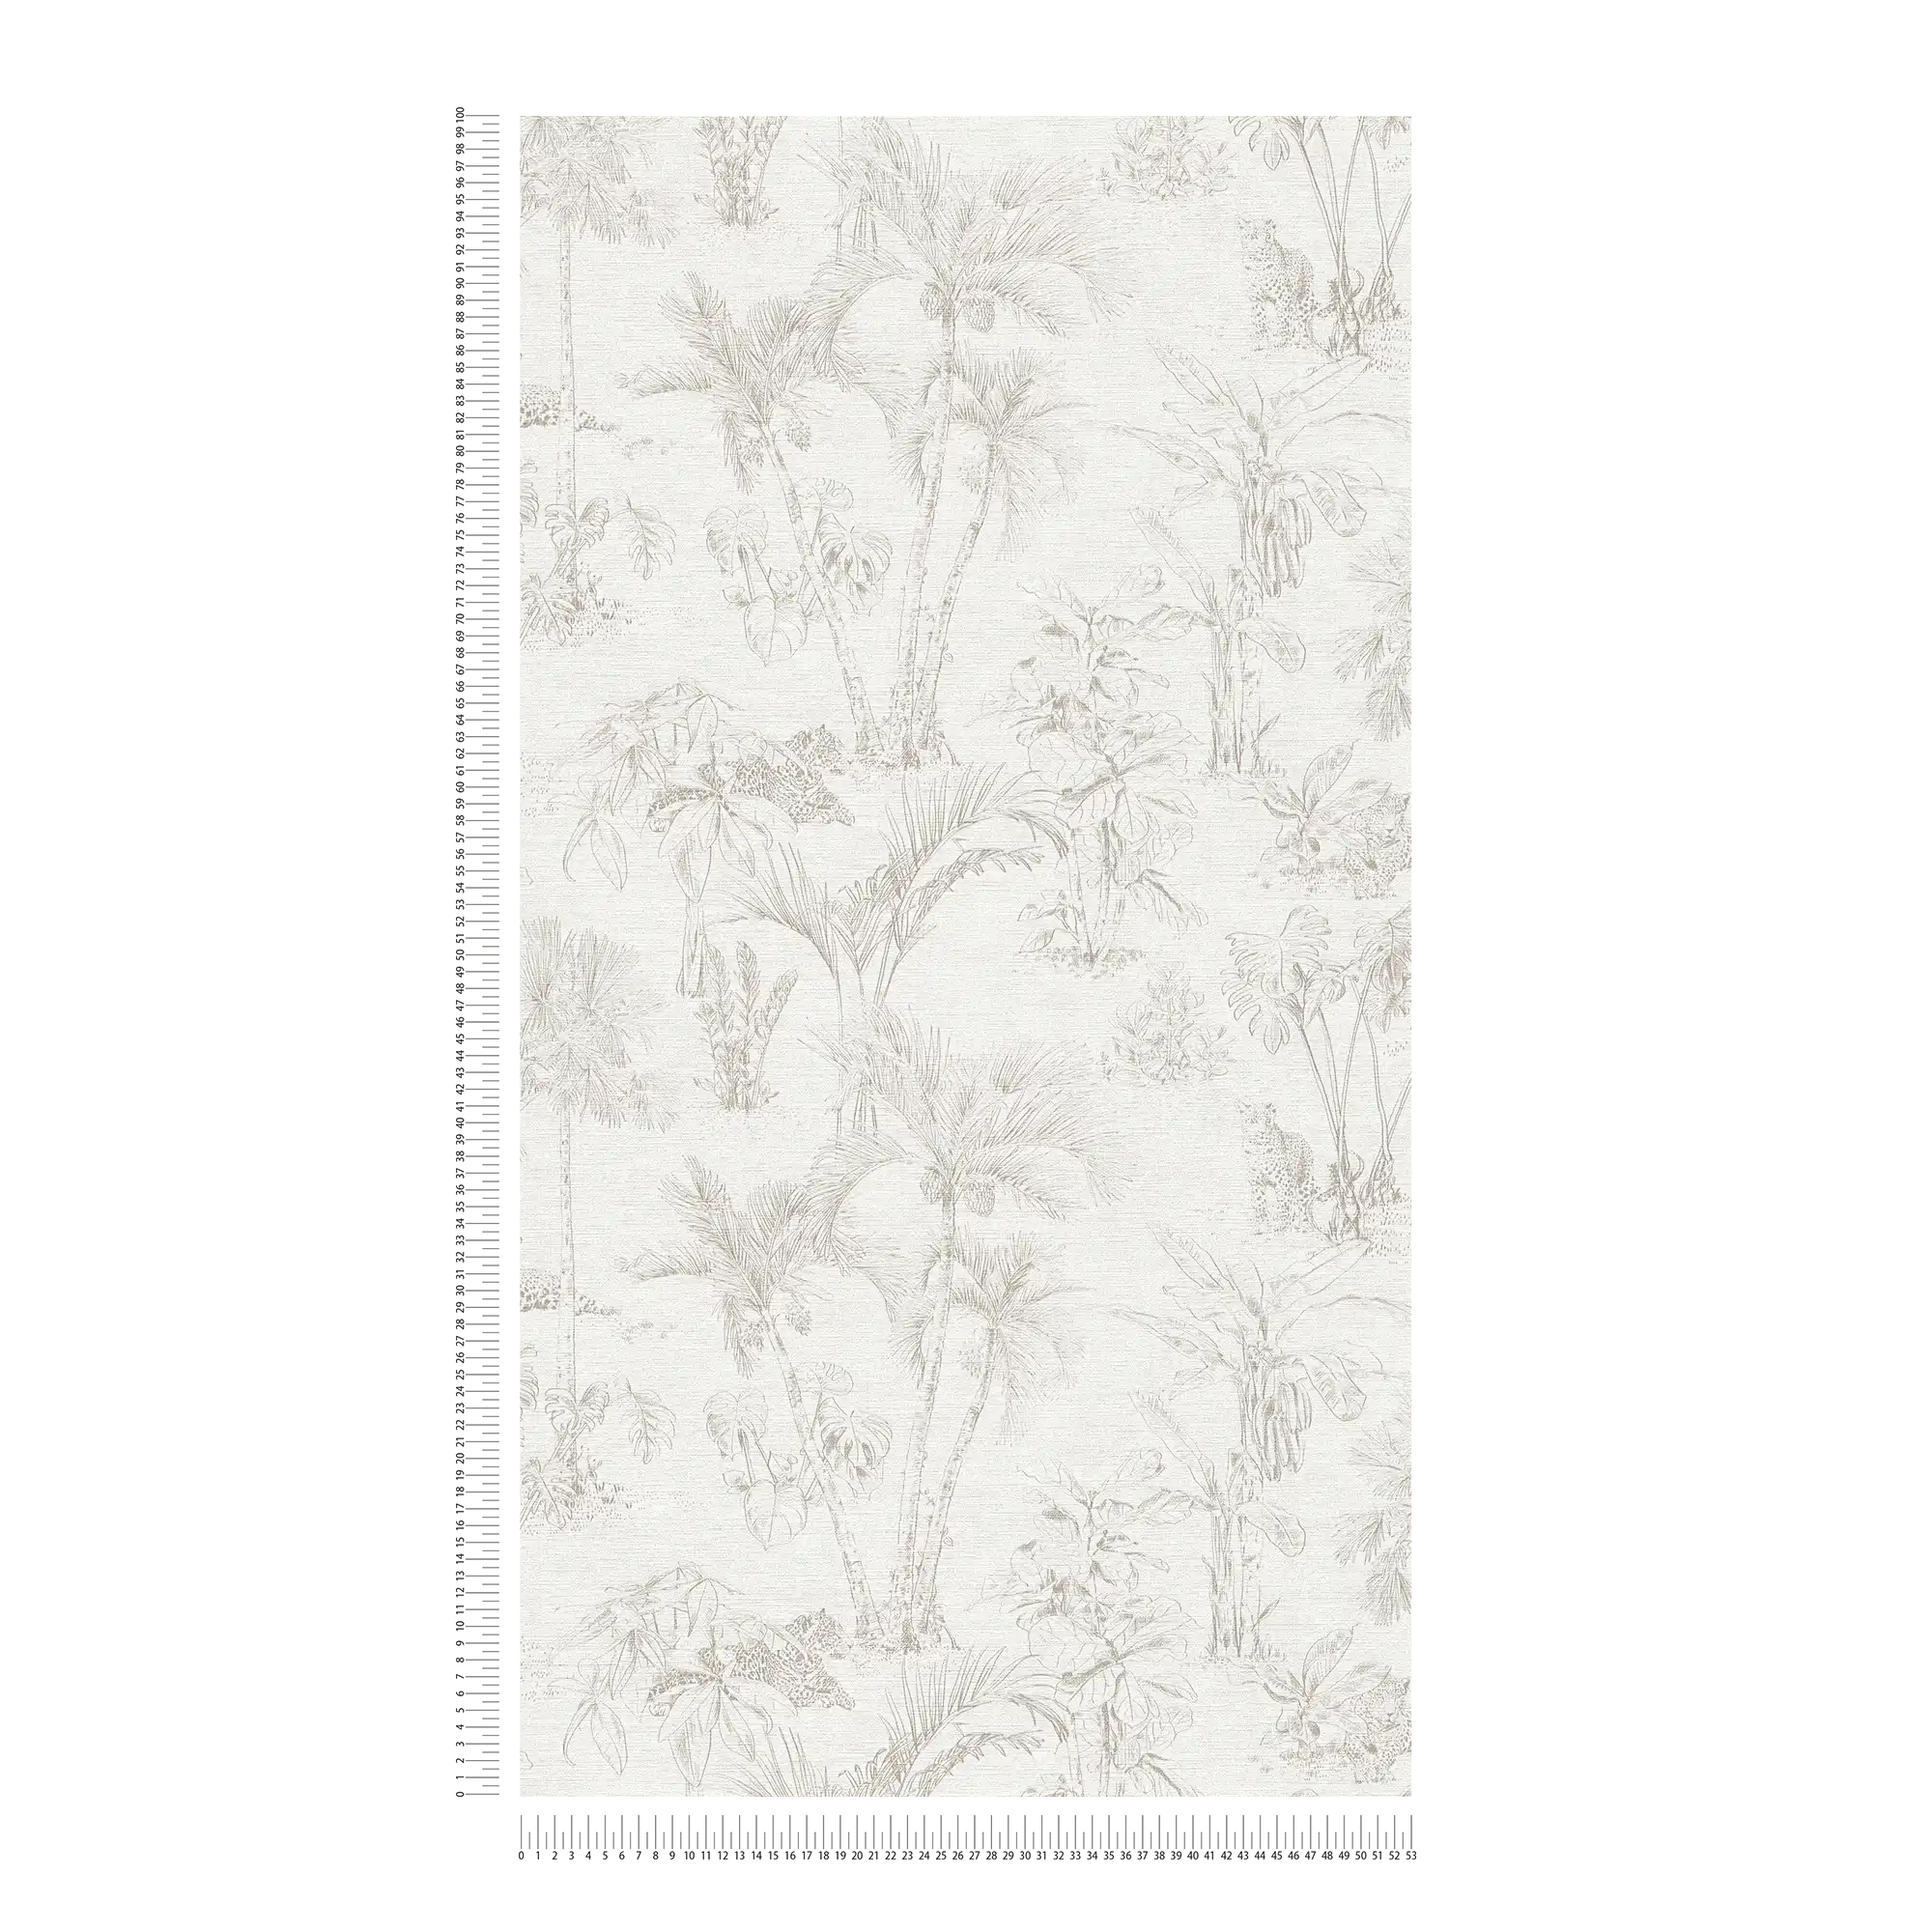             Jungle wallpaper with palm leaves & animal motif - beige, grey
        